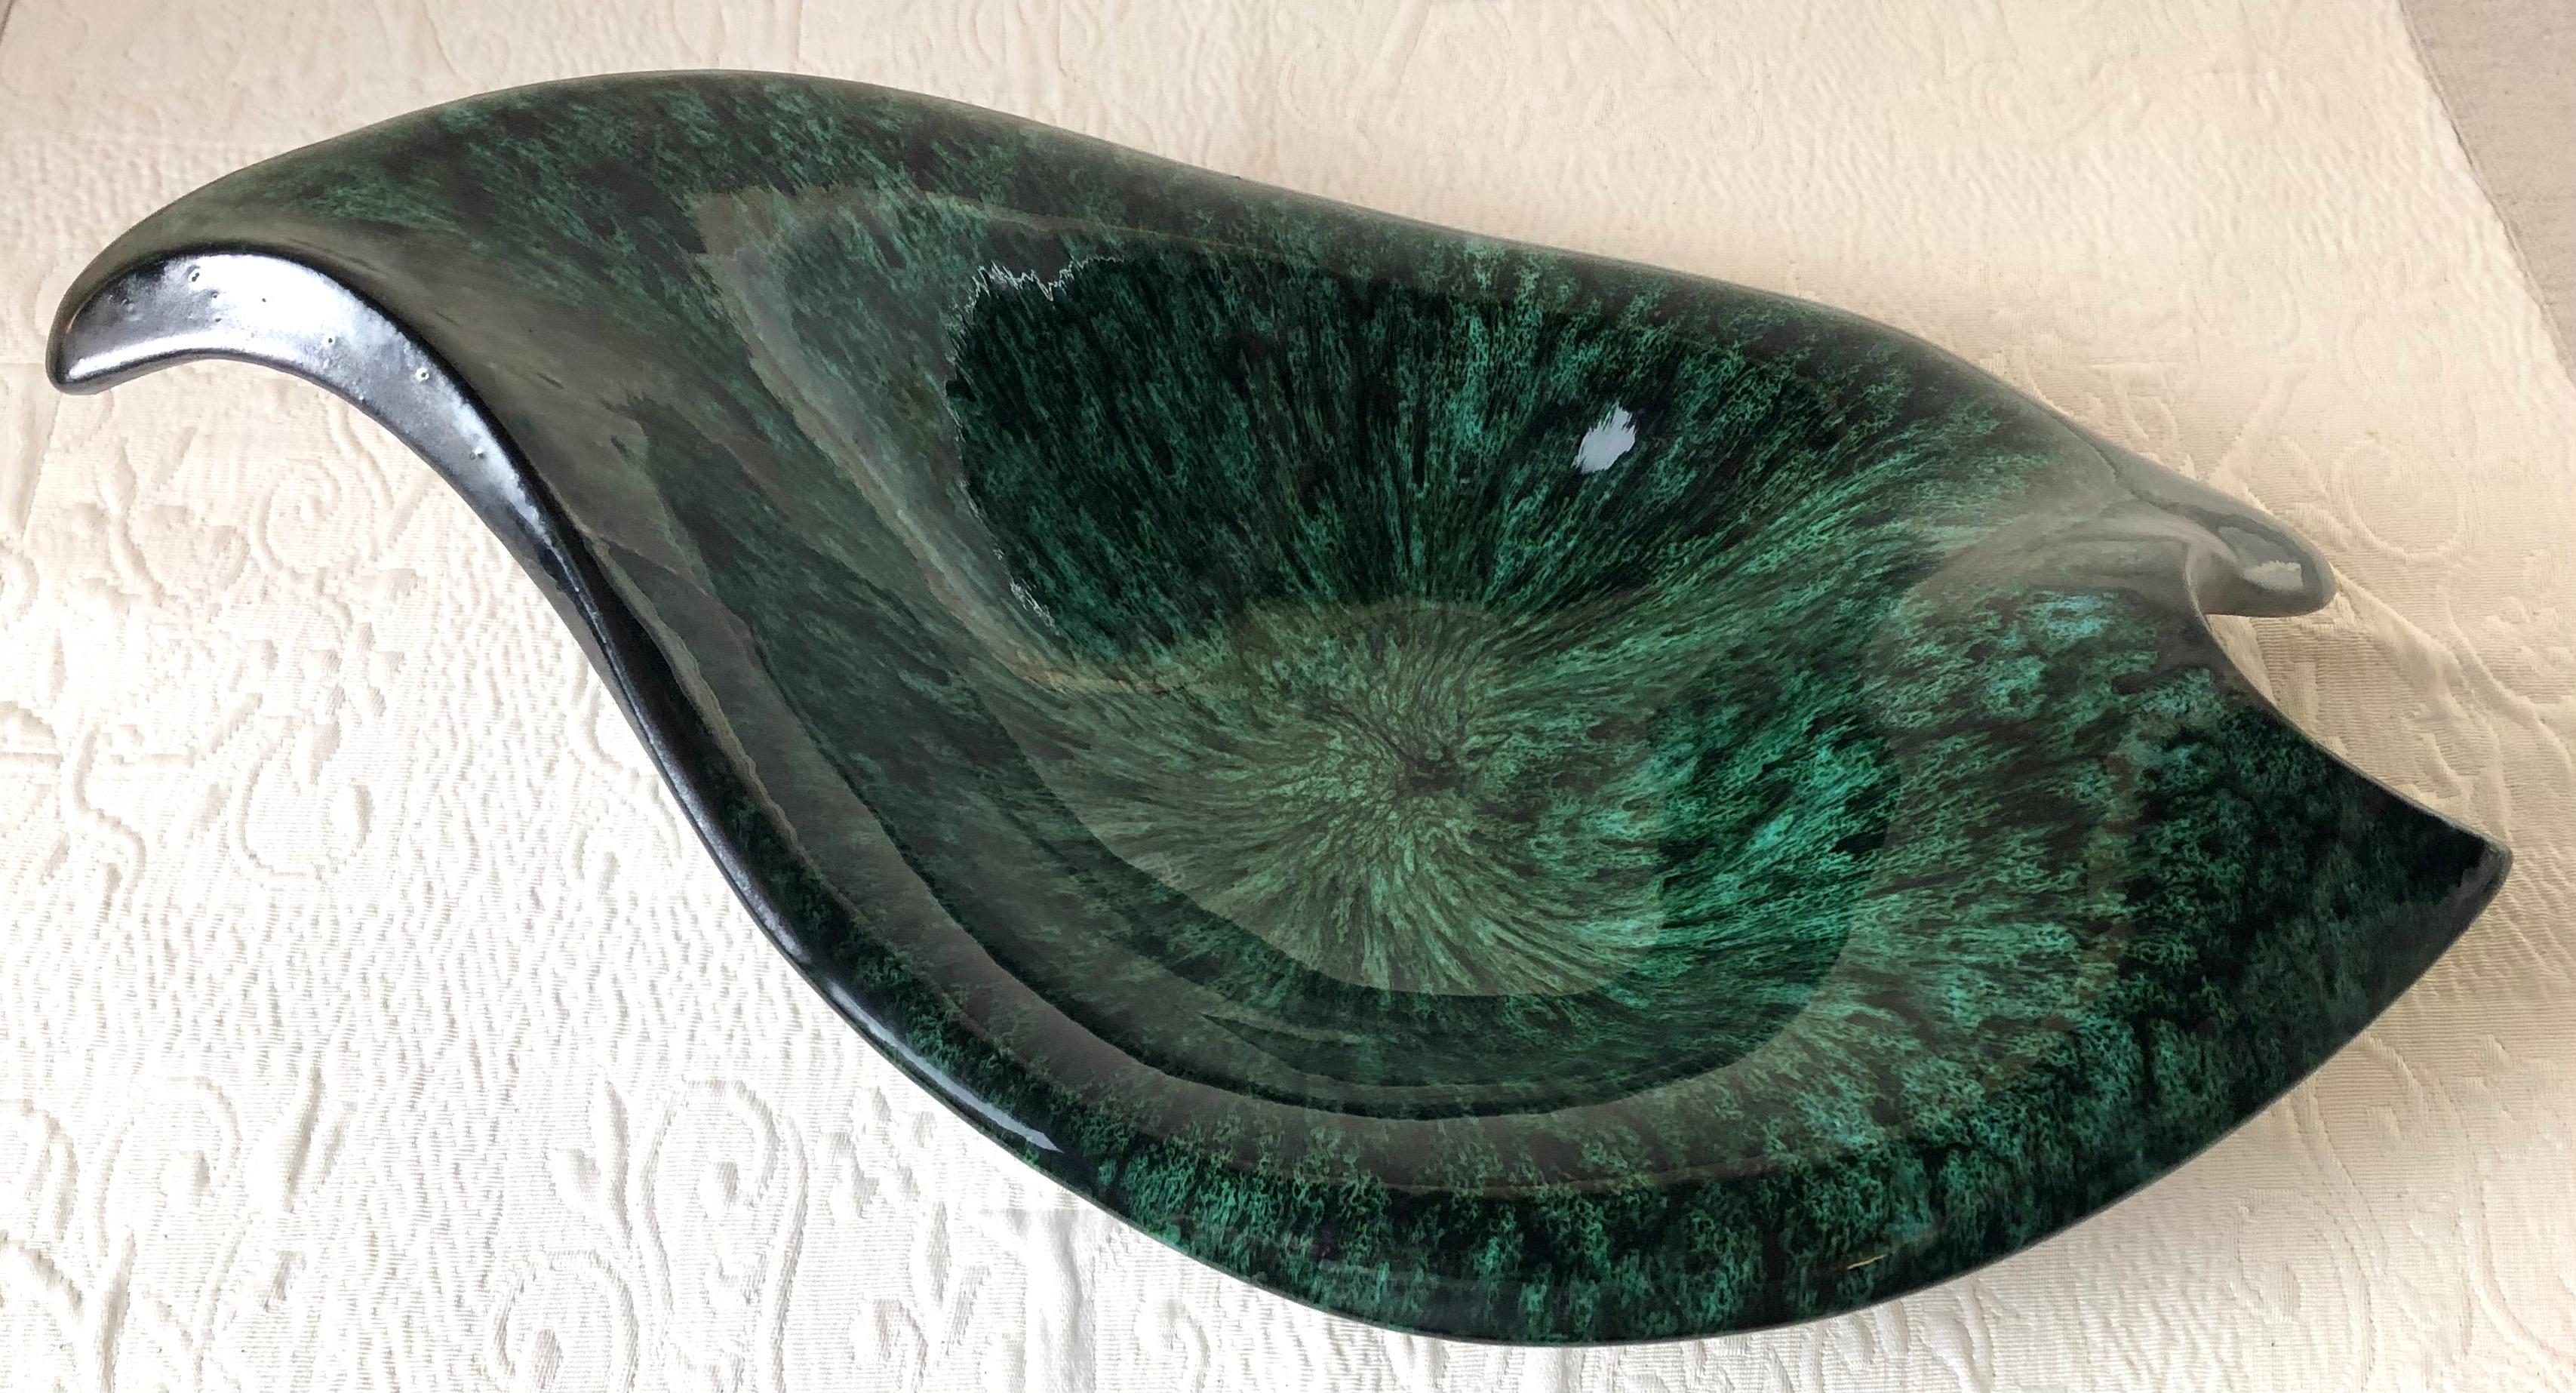 Stunning very large French mid-century black matte and glazed green ceramic bowl, signed.
This mid-century ceramic piece features magnificent colors of various shades of glazed green and a black matte finish on the base.

Would enhance any table or